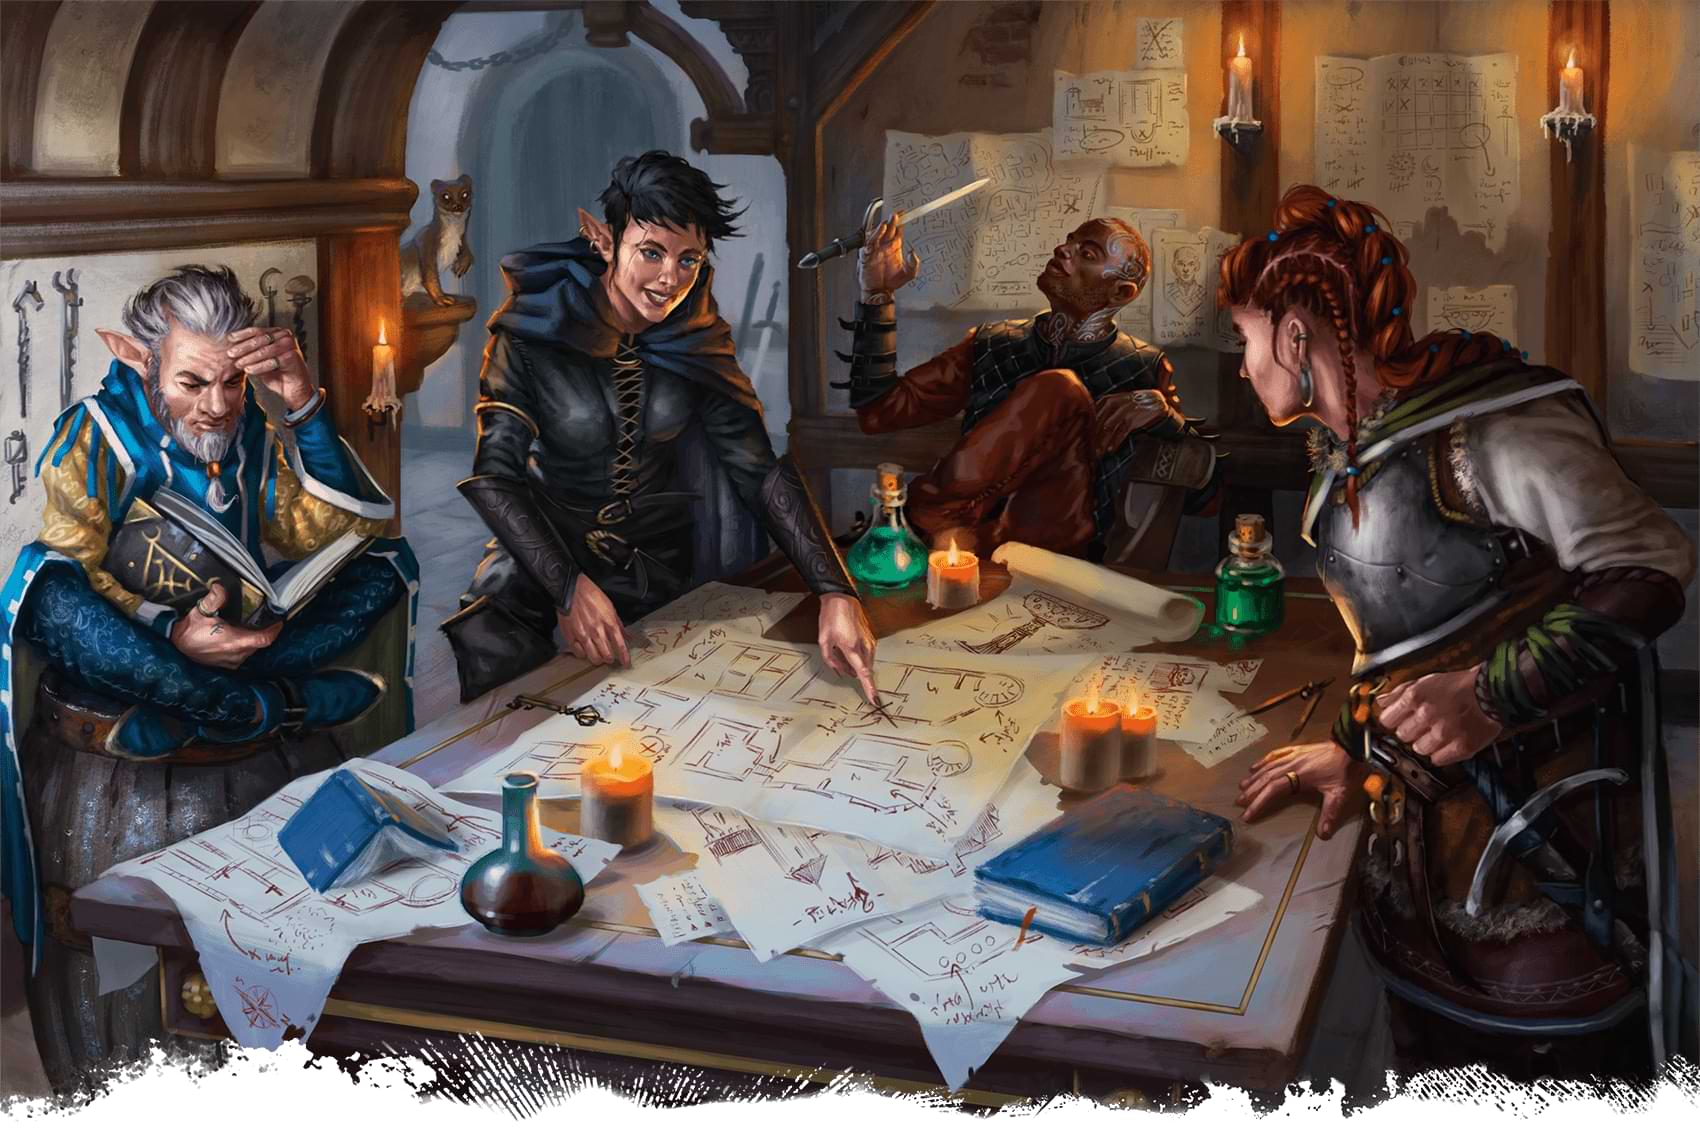 A group of adventurers gathers around a table to hear a plan